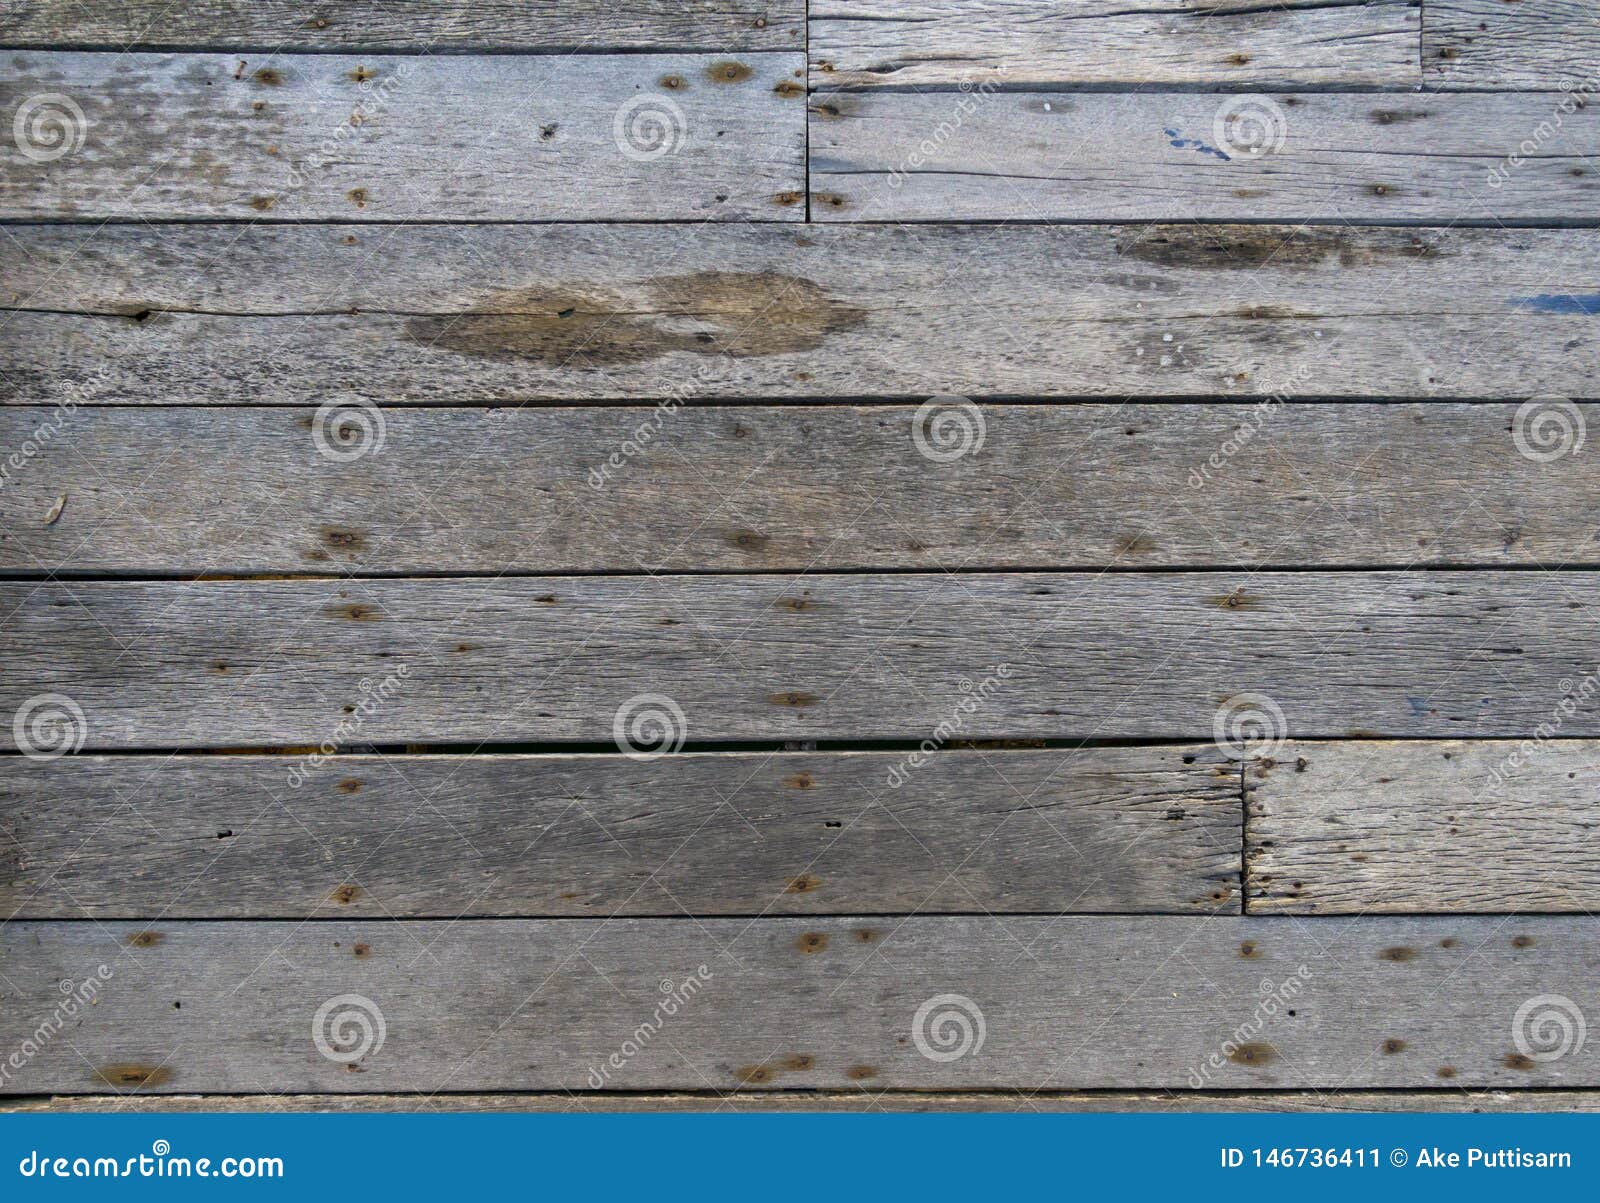 old wood texture background flor from fisherman`s house